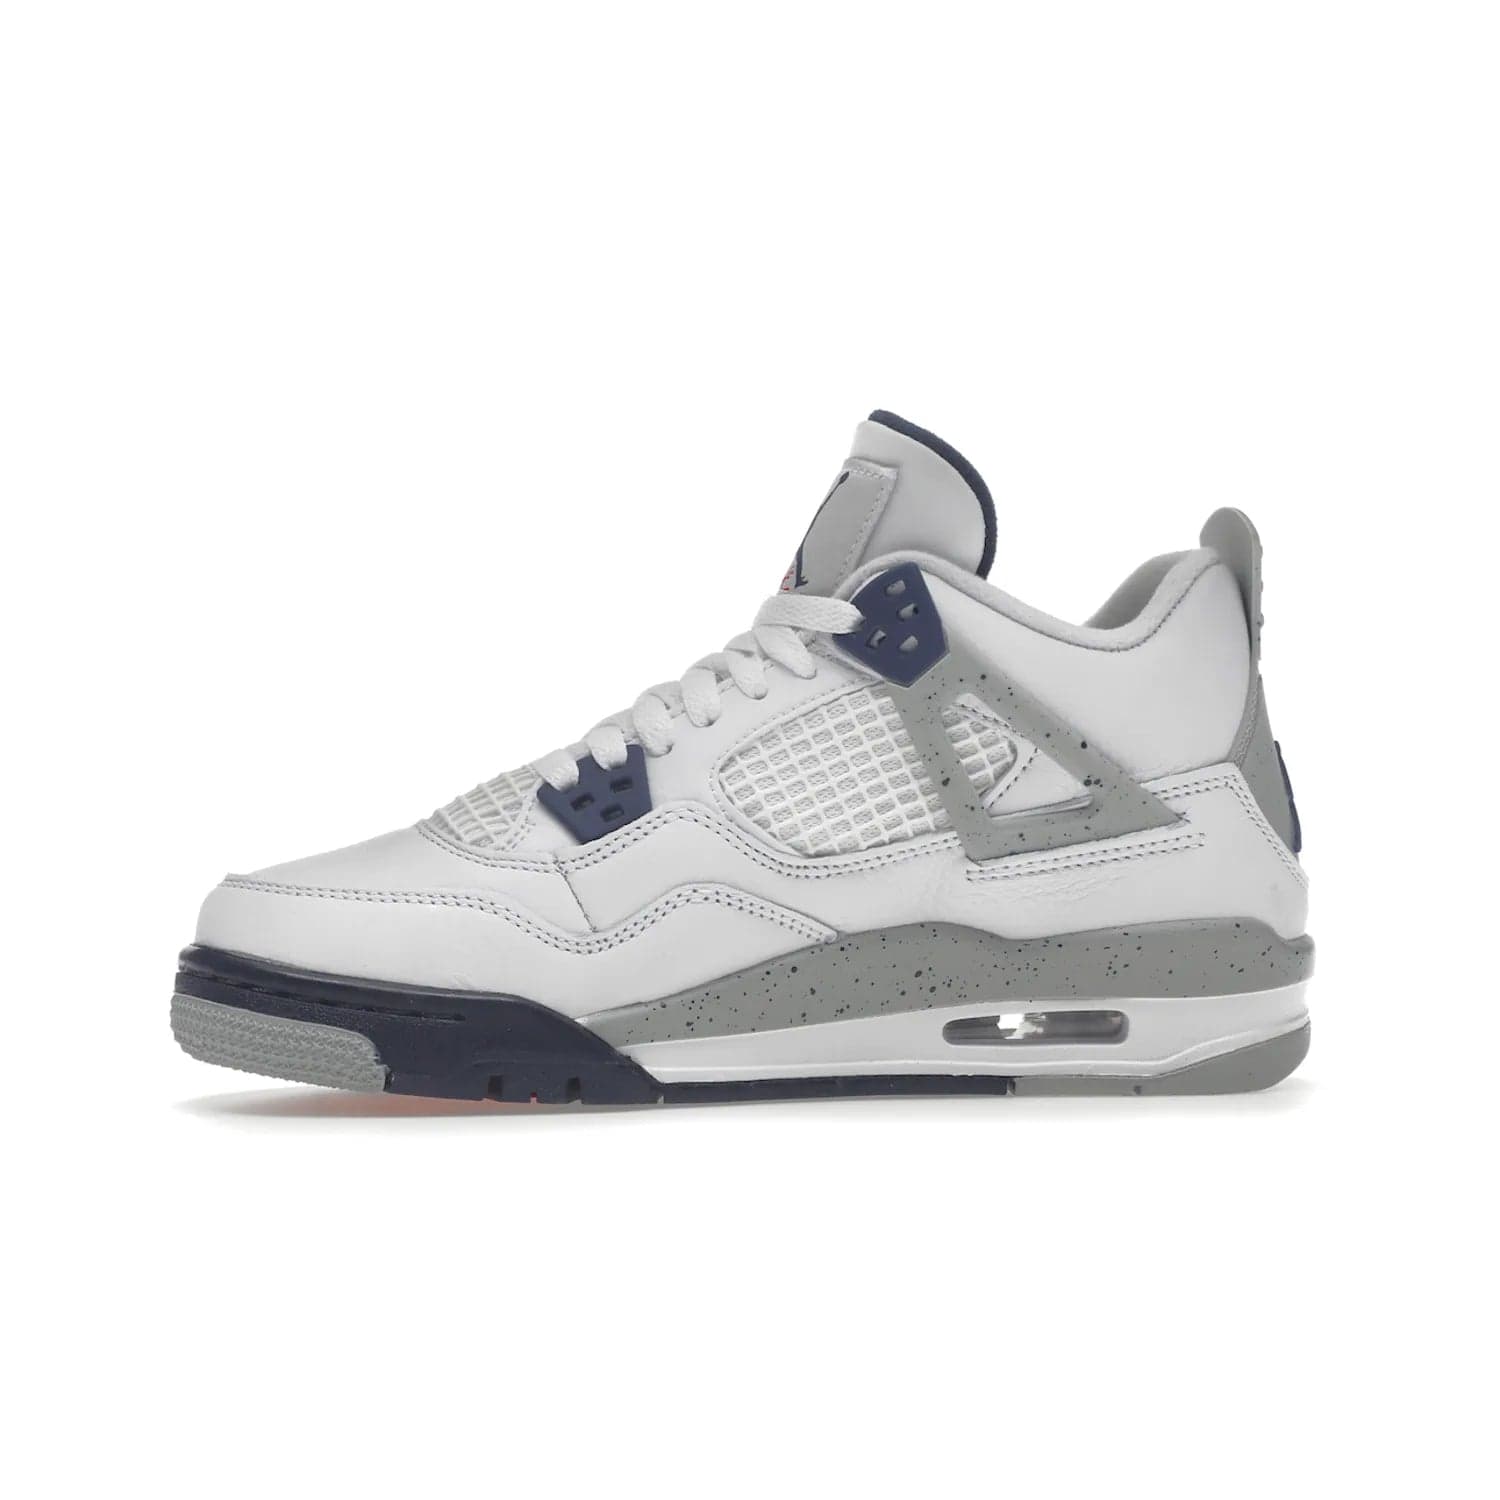 Jordan 4 Retro Midnight Navy (GS) - Image 18 - Only at www.BallersClubKickz.com - Shop the Air Jordan 4 Retro Midnight Navy GS. The white leather upper features black support wings & heel tab, navy eyelets & woven tongue tag with Jumpman logos. The midsole features two-tone polyurethane insole & AIR units in the heel & forefoot. Get the white/midnight navy/light smoke grey/fire colorway & show off your style.